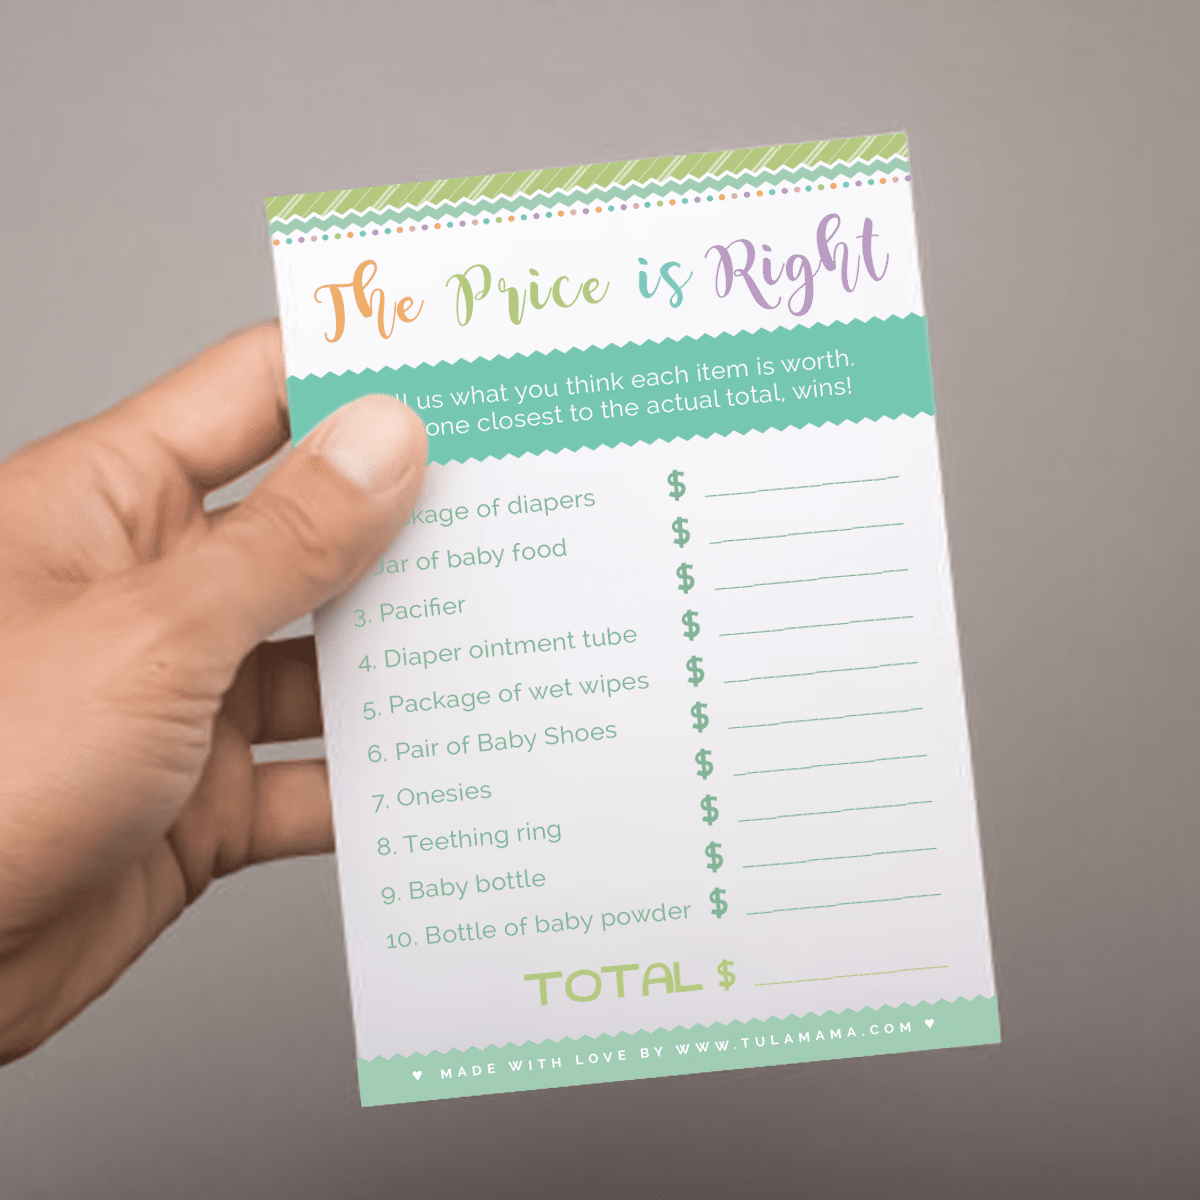 Free Printable What's In Your Purse Game